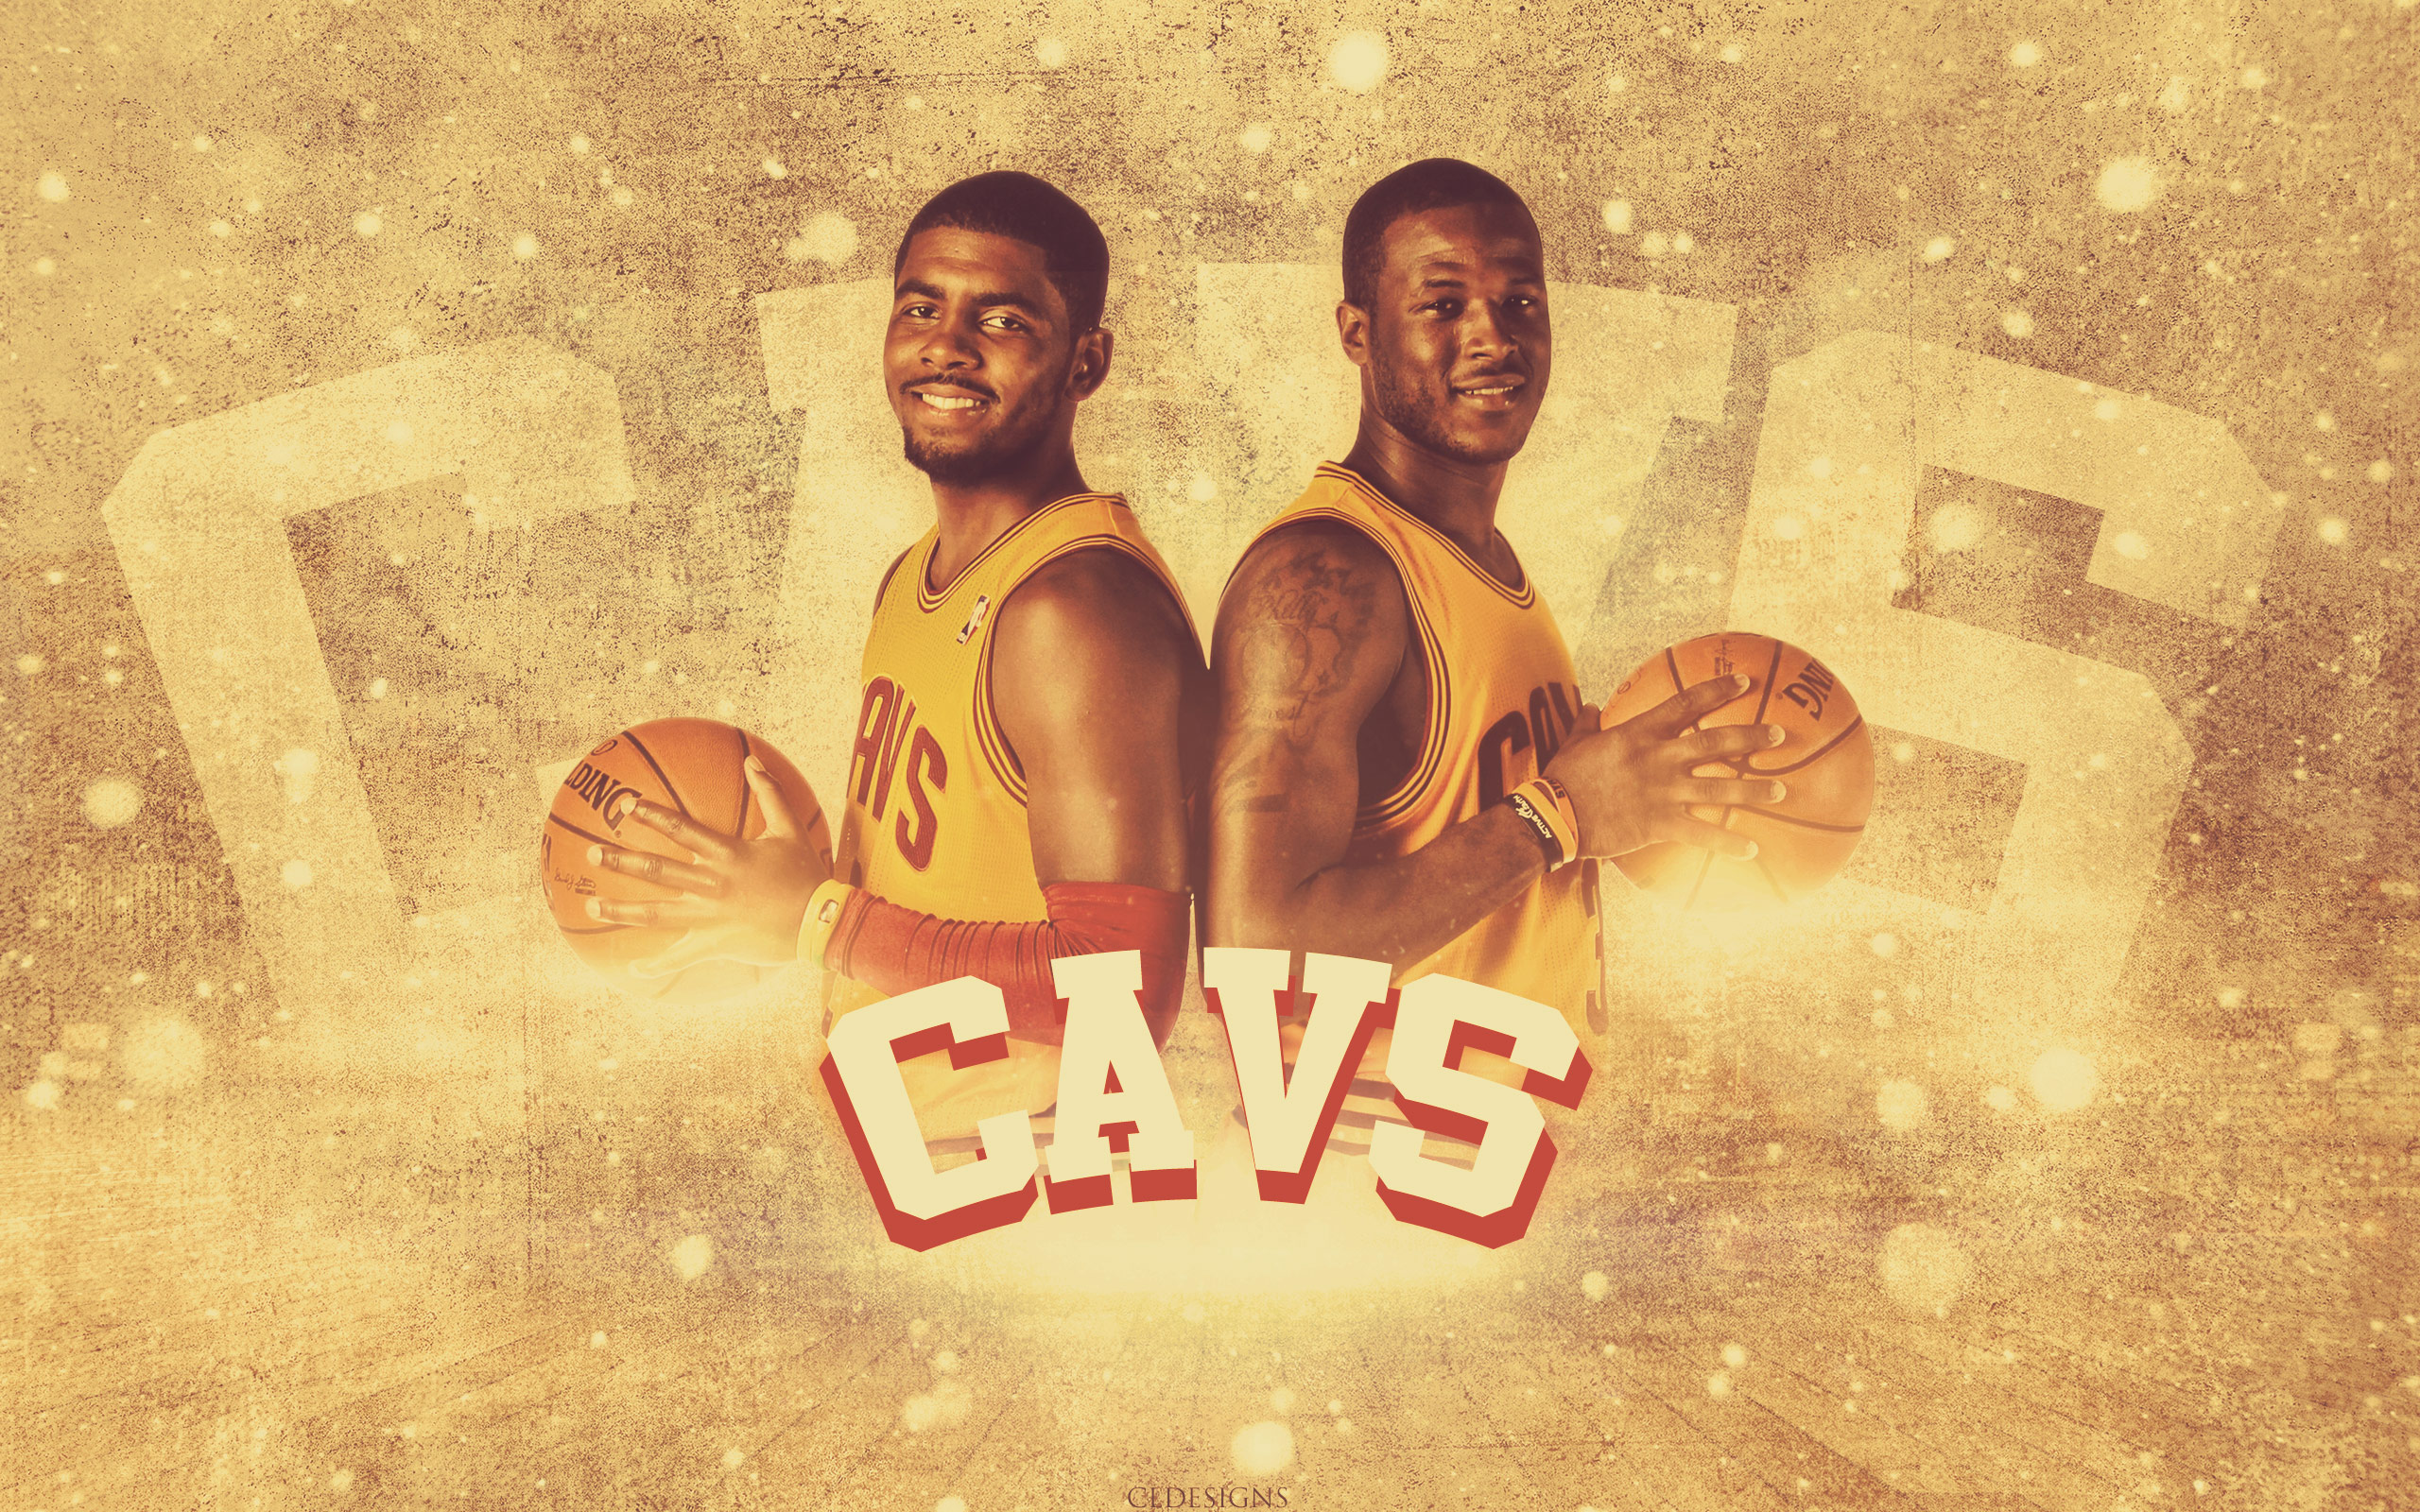 sports, cleveland cavaliers, cavs, dion waiters, kyrie irving, basketball